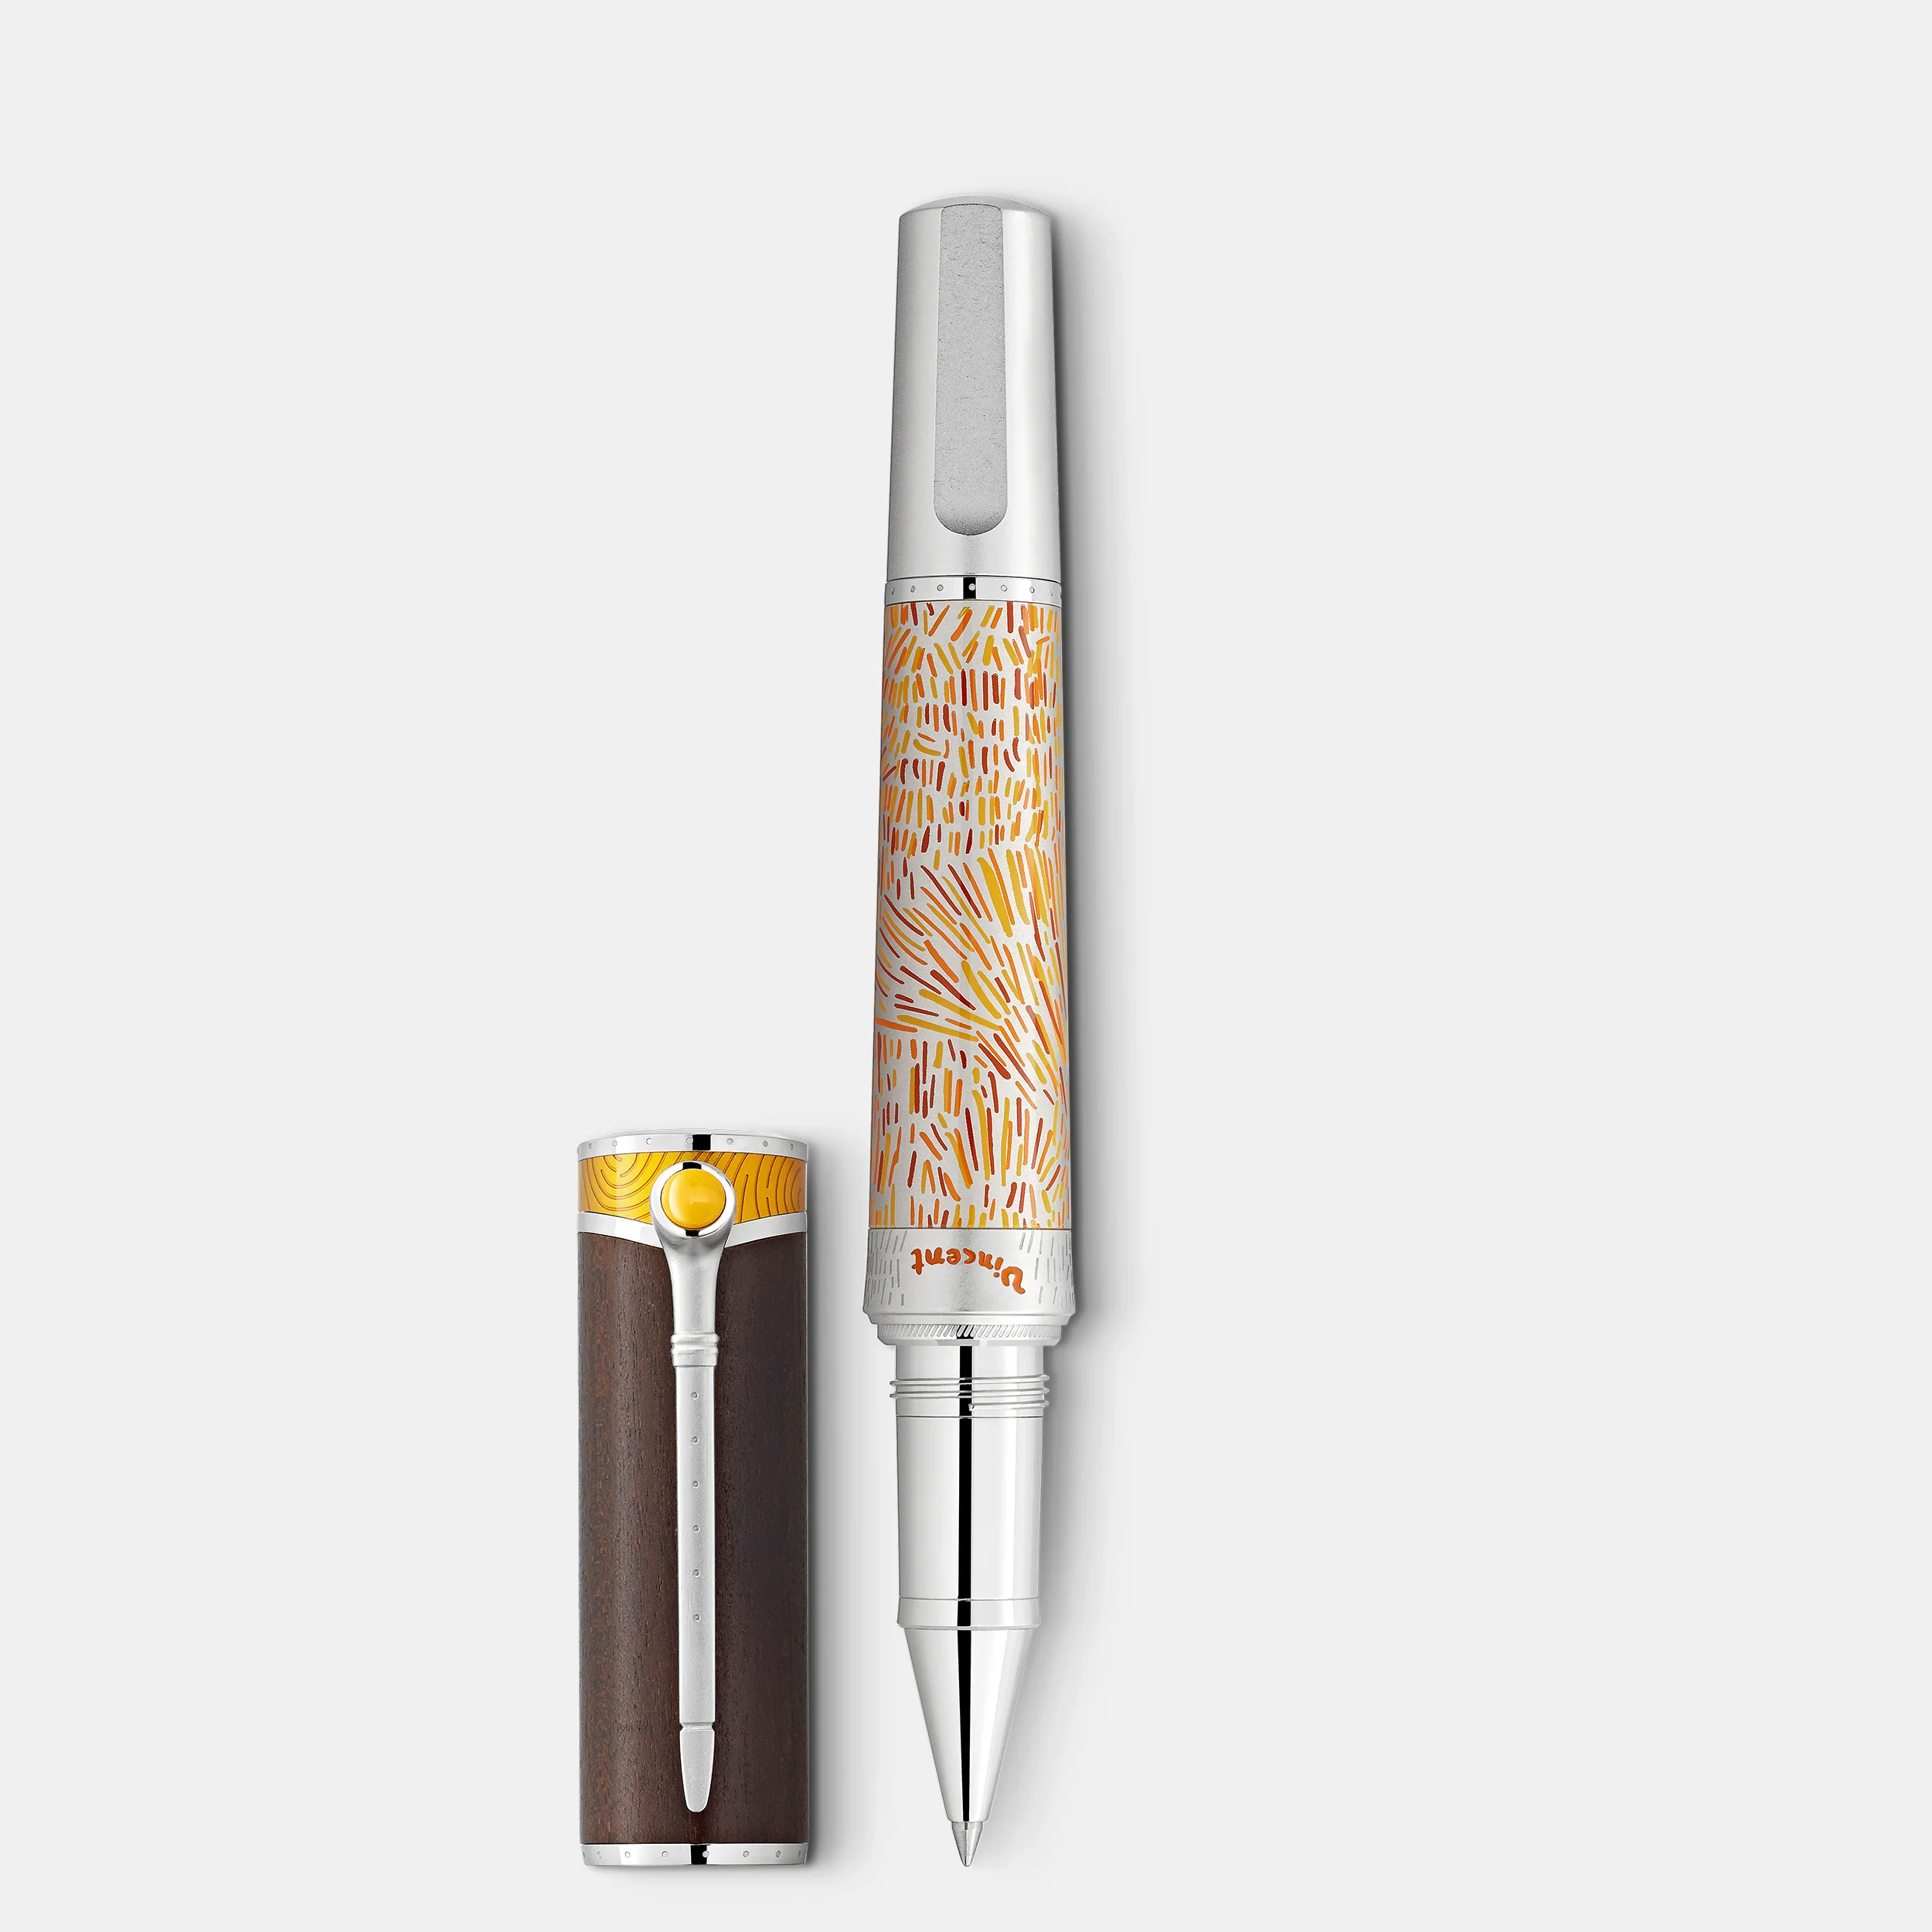 Masters of Art Homage to Vincent van Gogh Limited Edition 4810 Fountain Pen